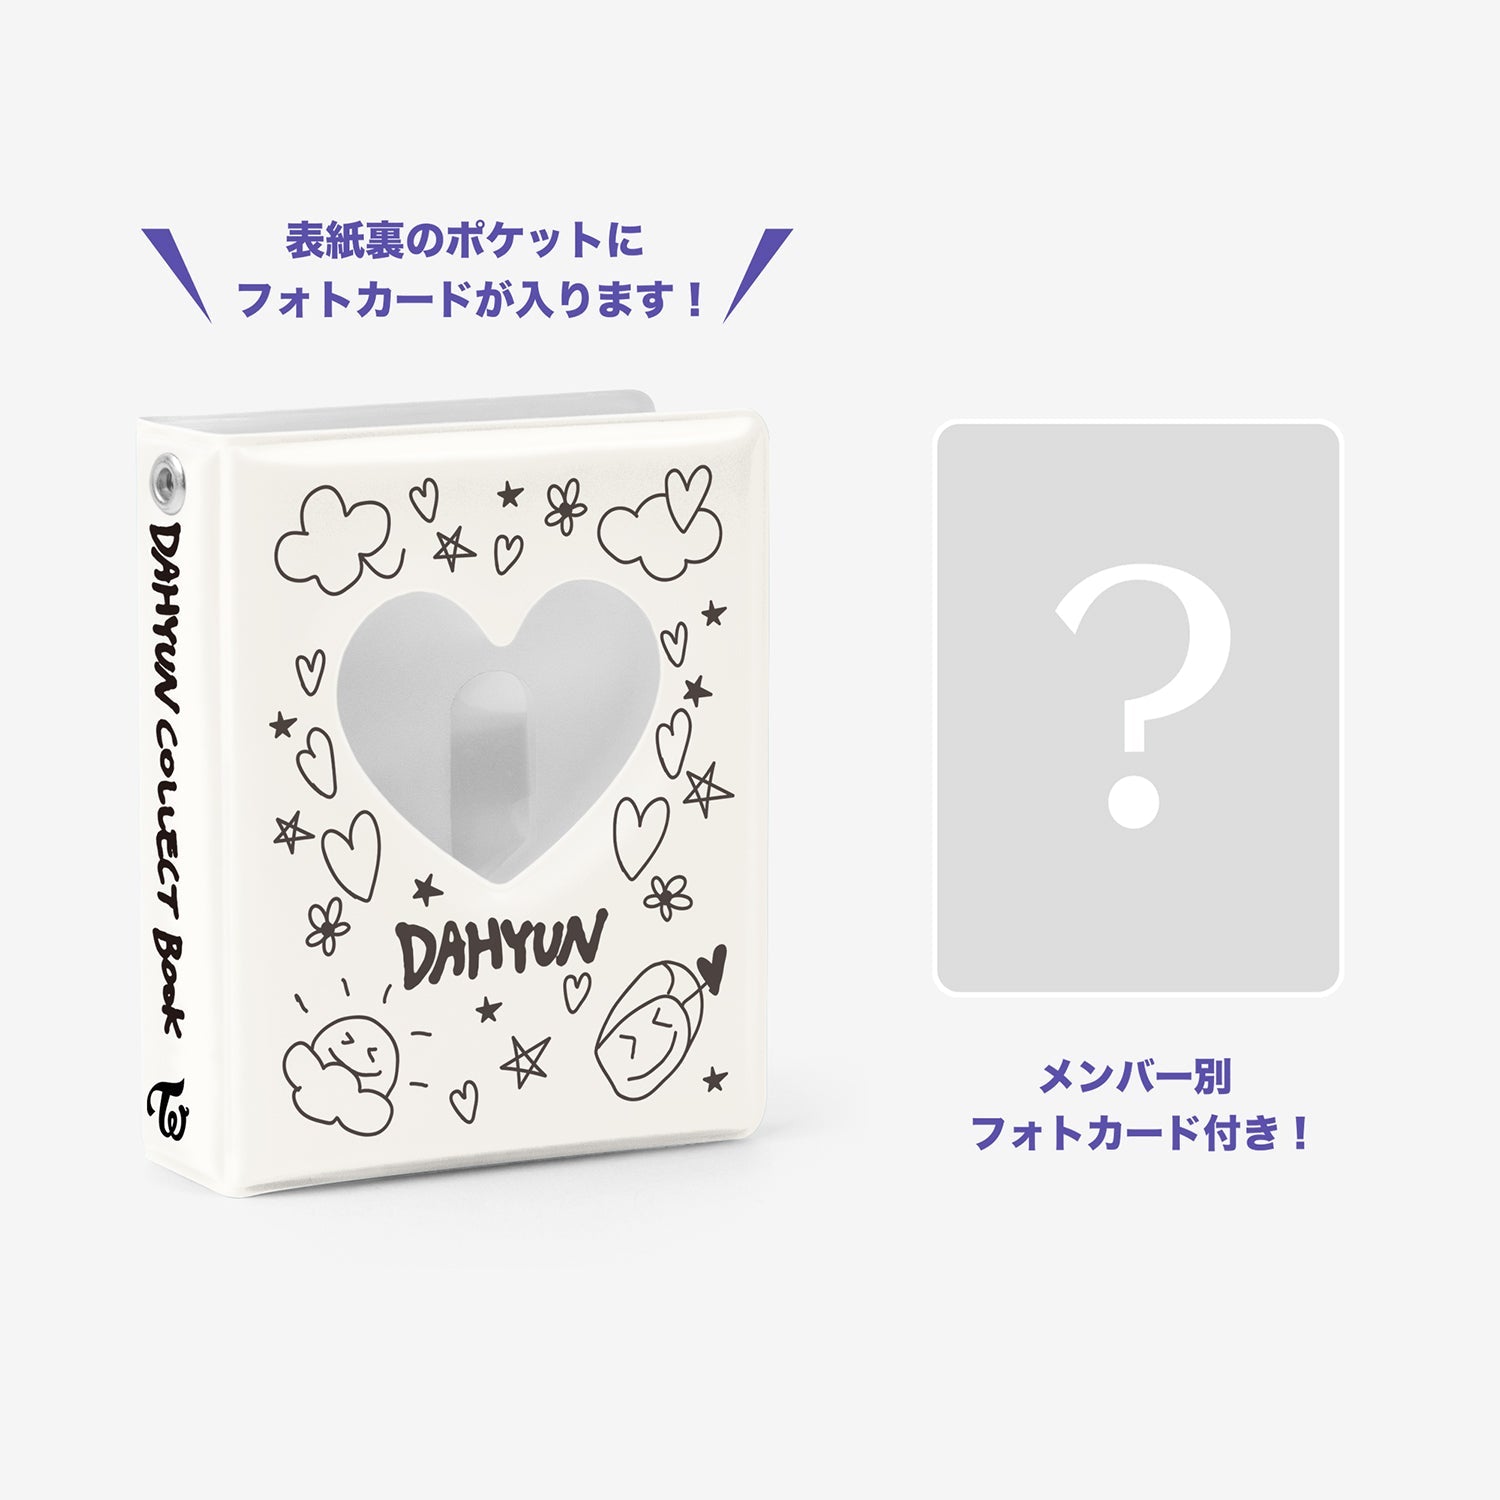 COLLECT BOOK Designed by DAHYUN / TWICE『JAPAN DEBUT 7th Anniversary』